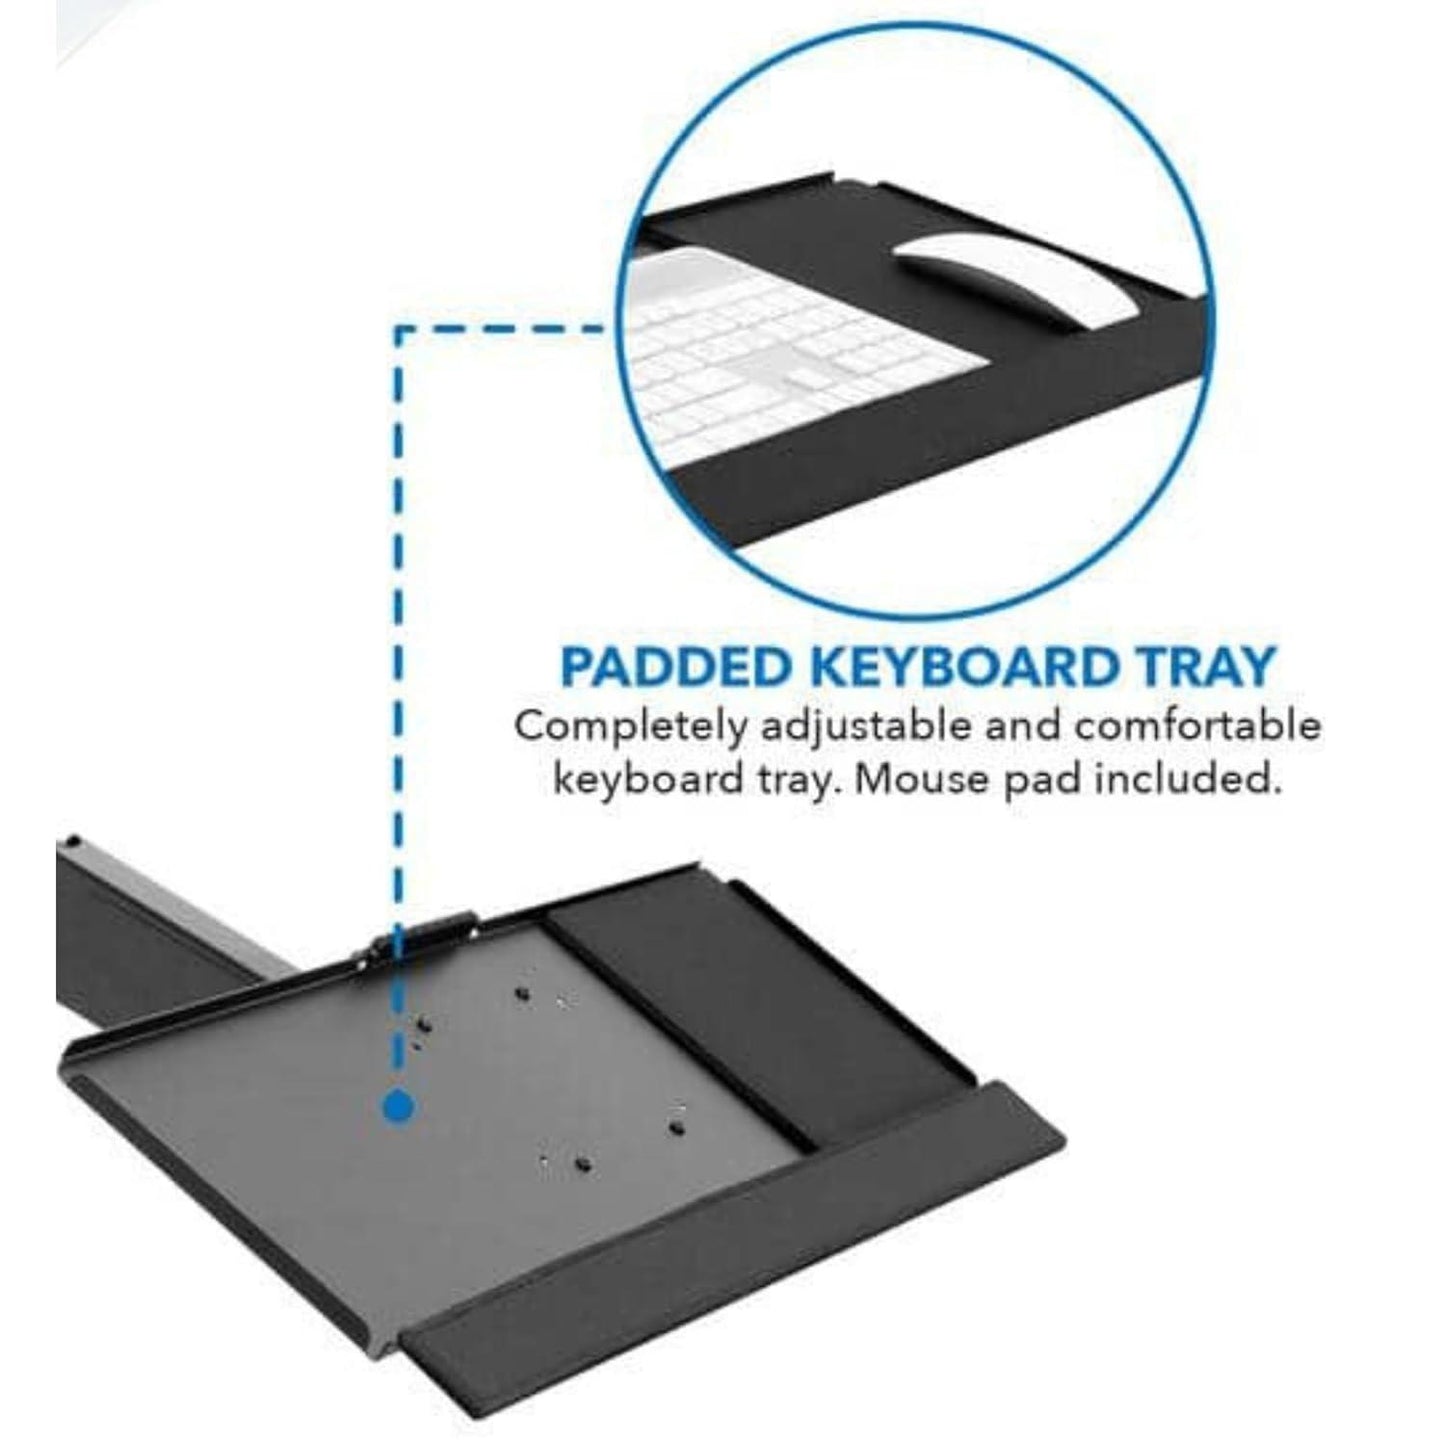 Keyboard VESA Mount with Large Mouse Pad for Comfort and Productivity - GADGET WAGON